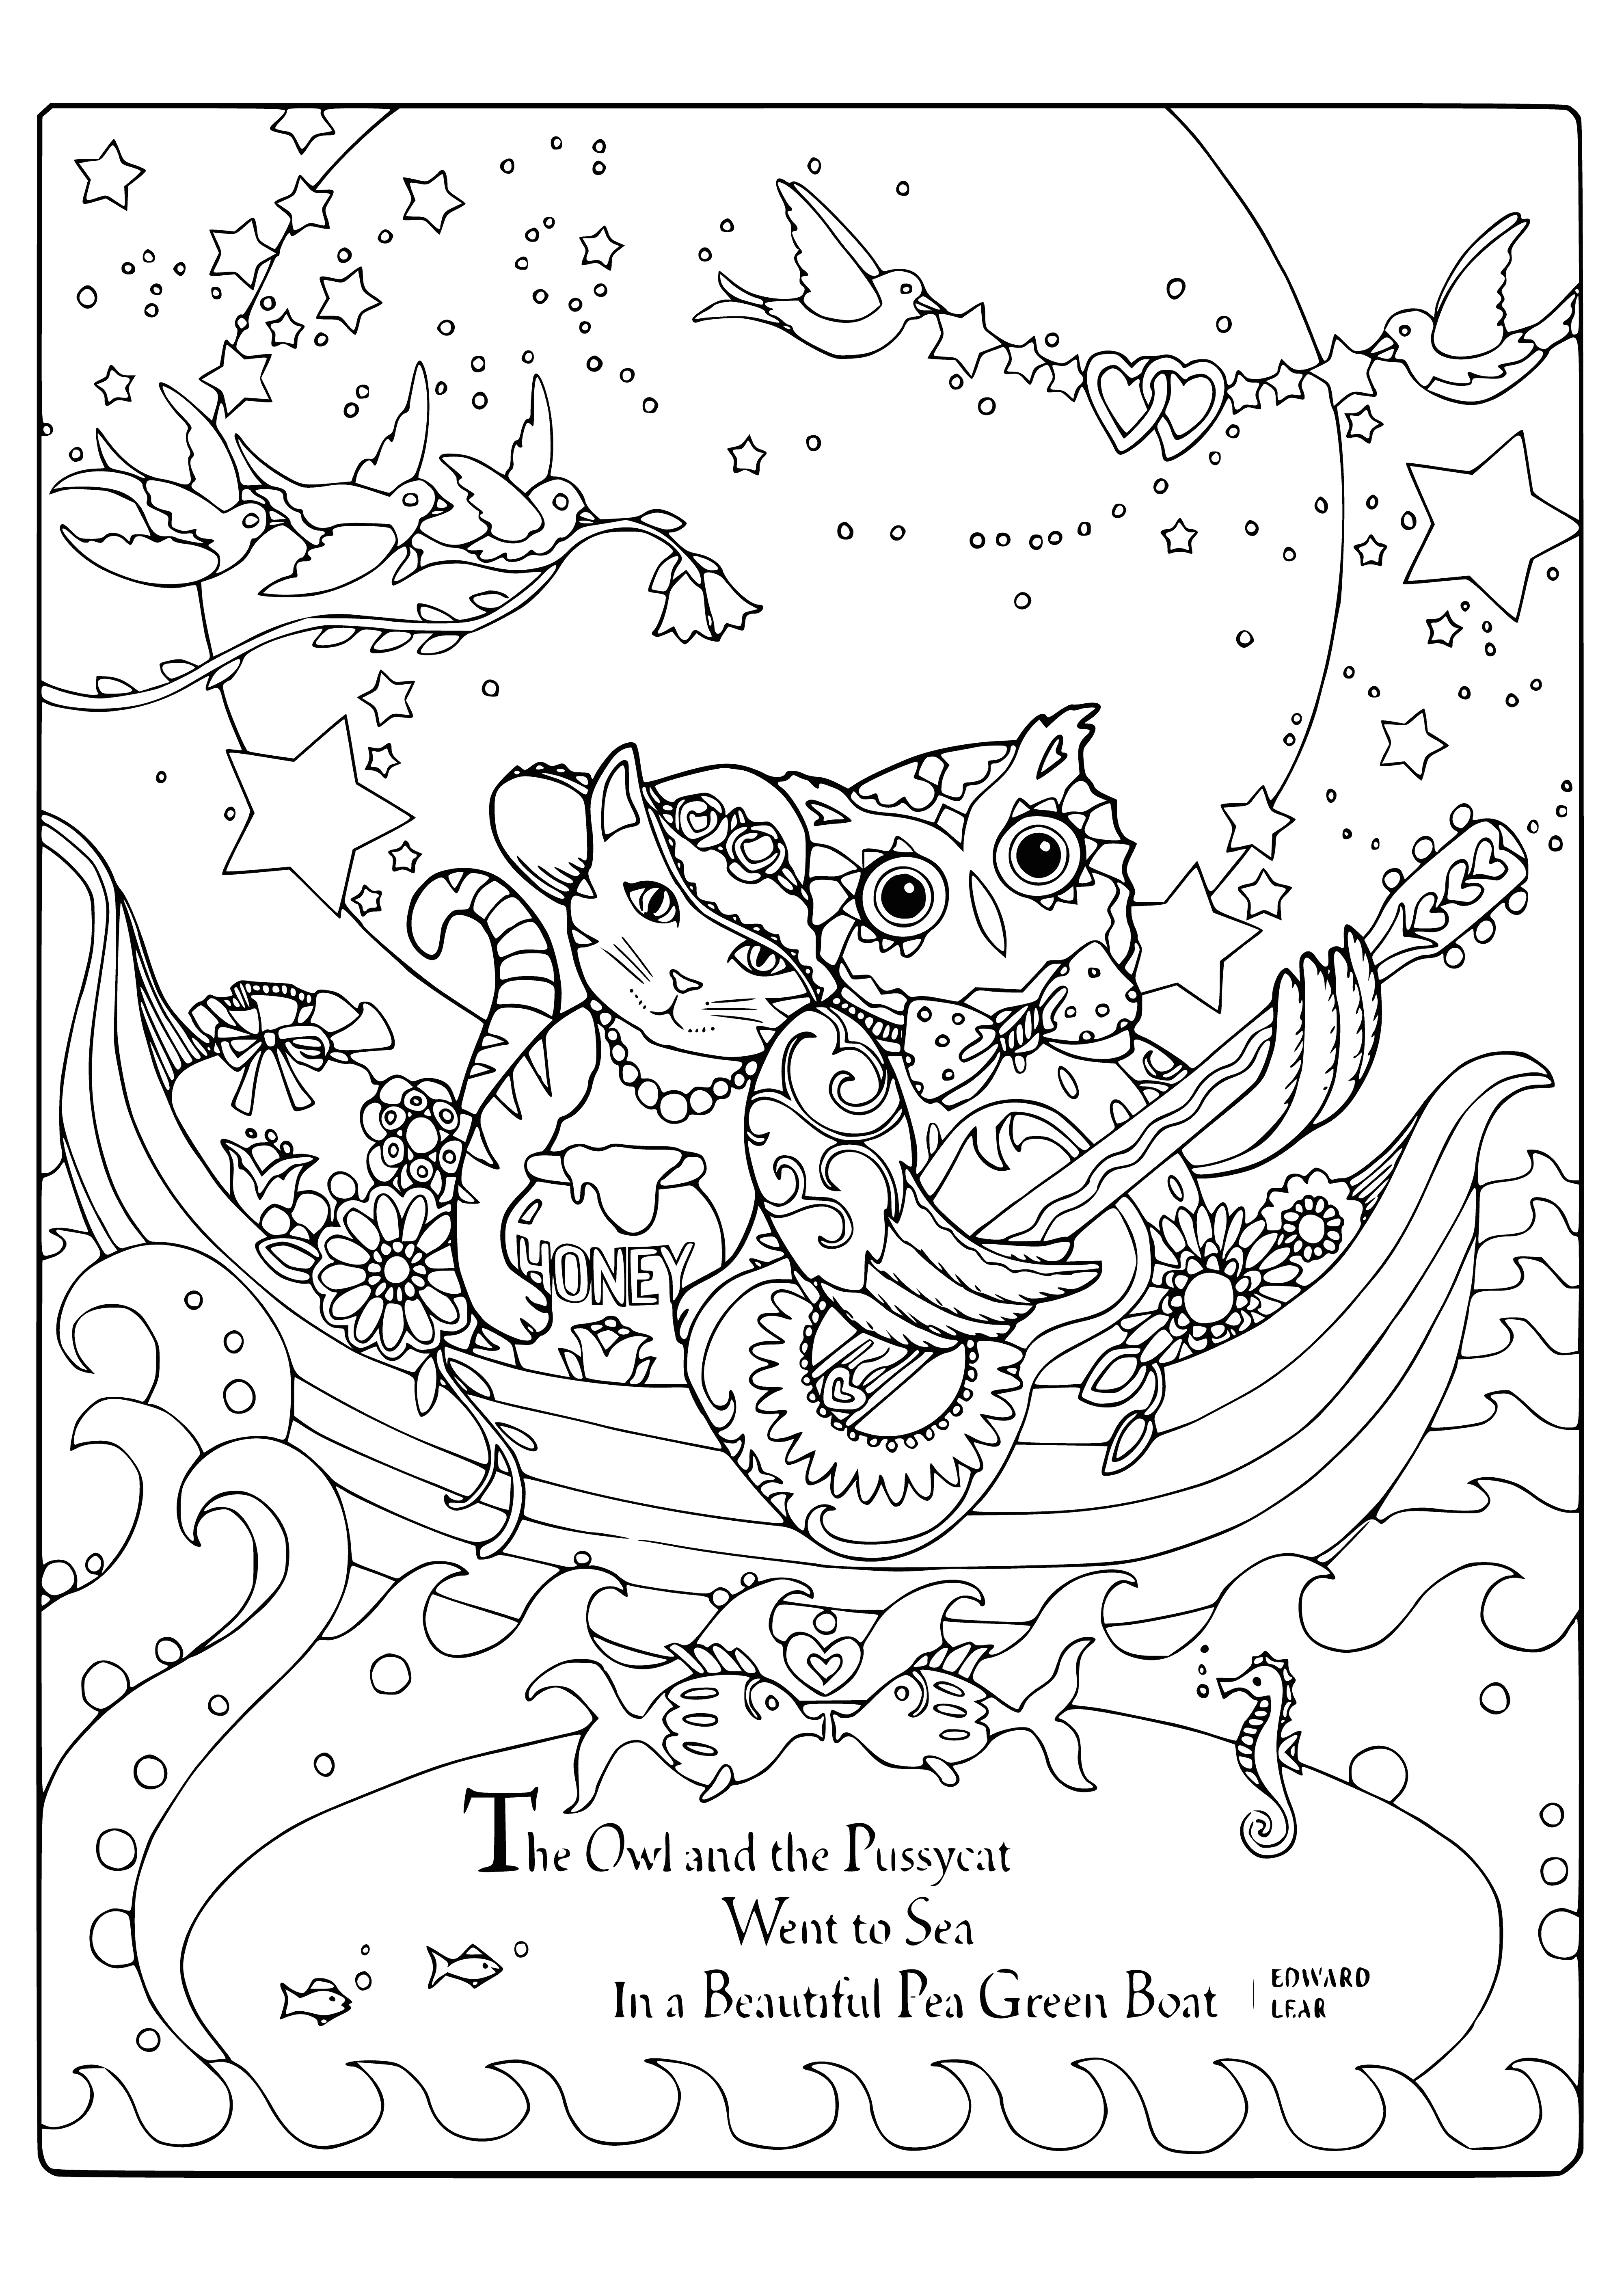 In the boat coloring page